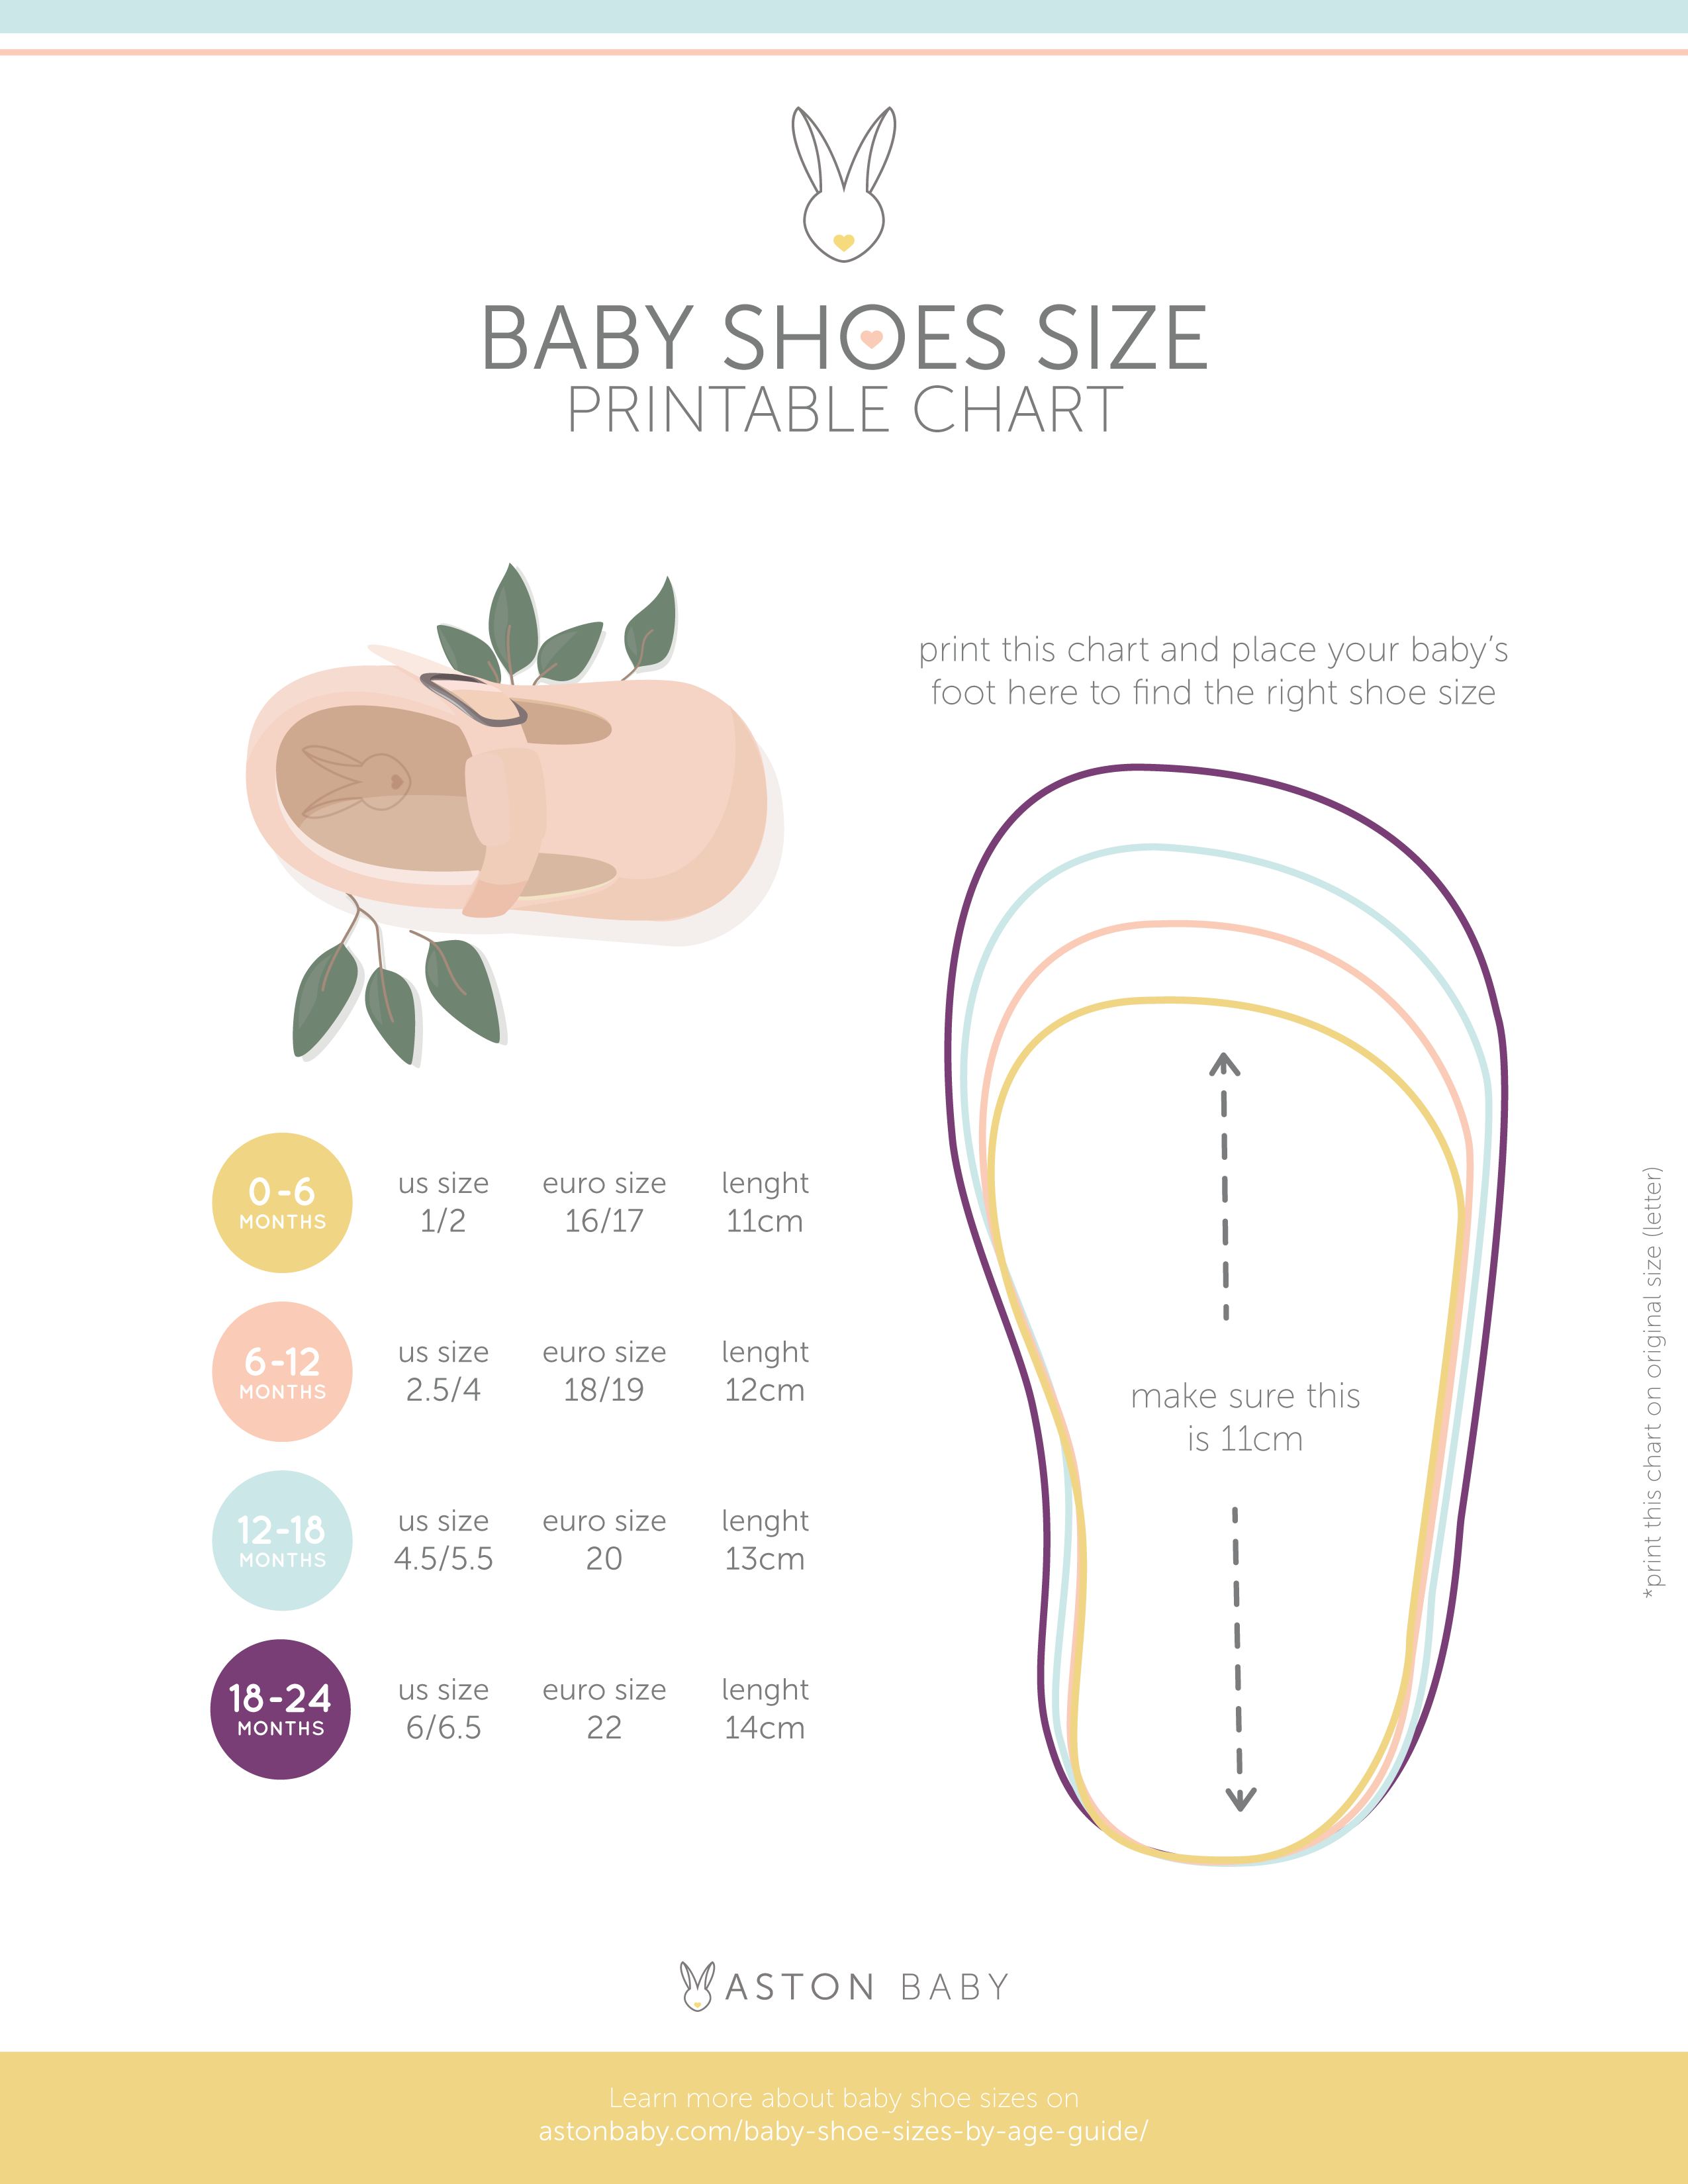 Baby's Shoe Size Chart By Age, What Size Shoe For 1-Year-Old | art-kk.com